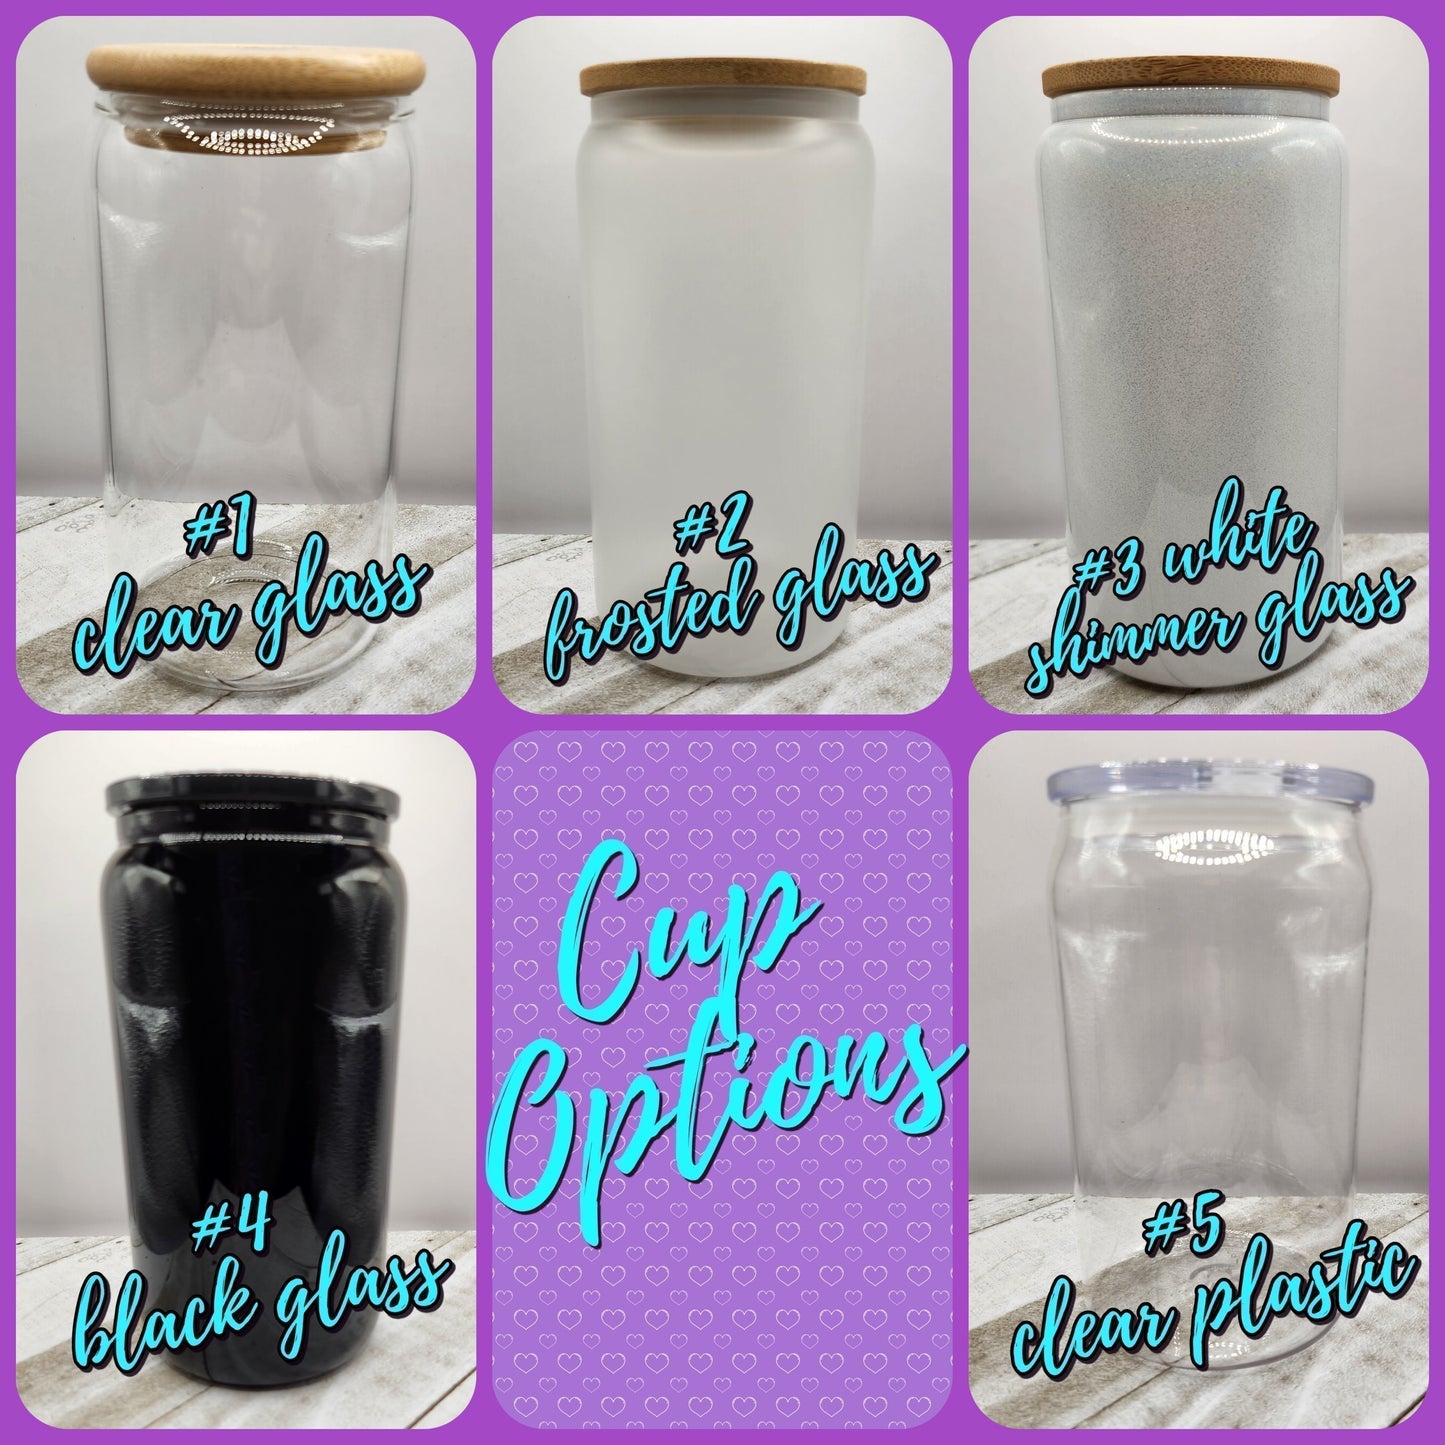 16oz Glass or Plastic Cup-Sea Turtles and Shells